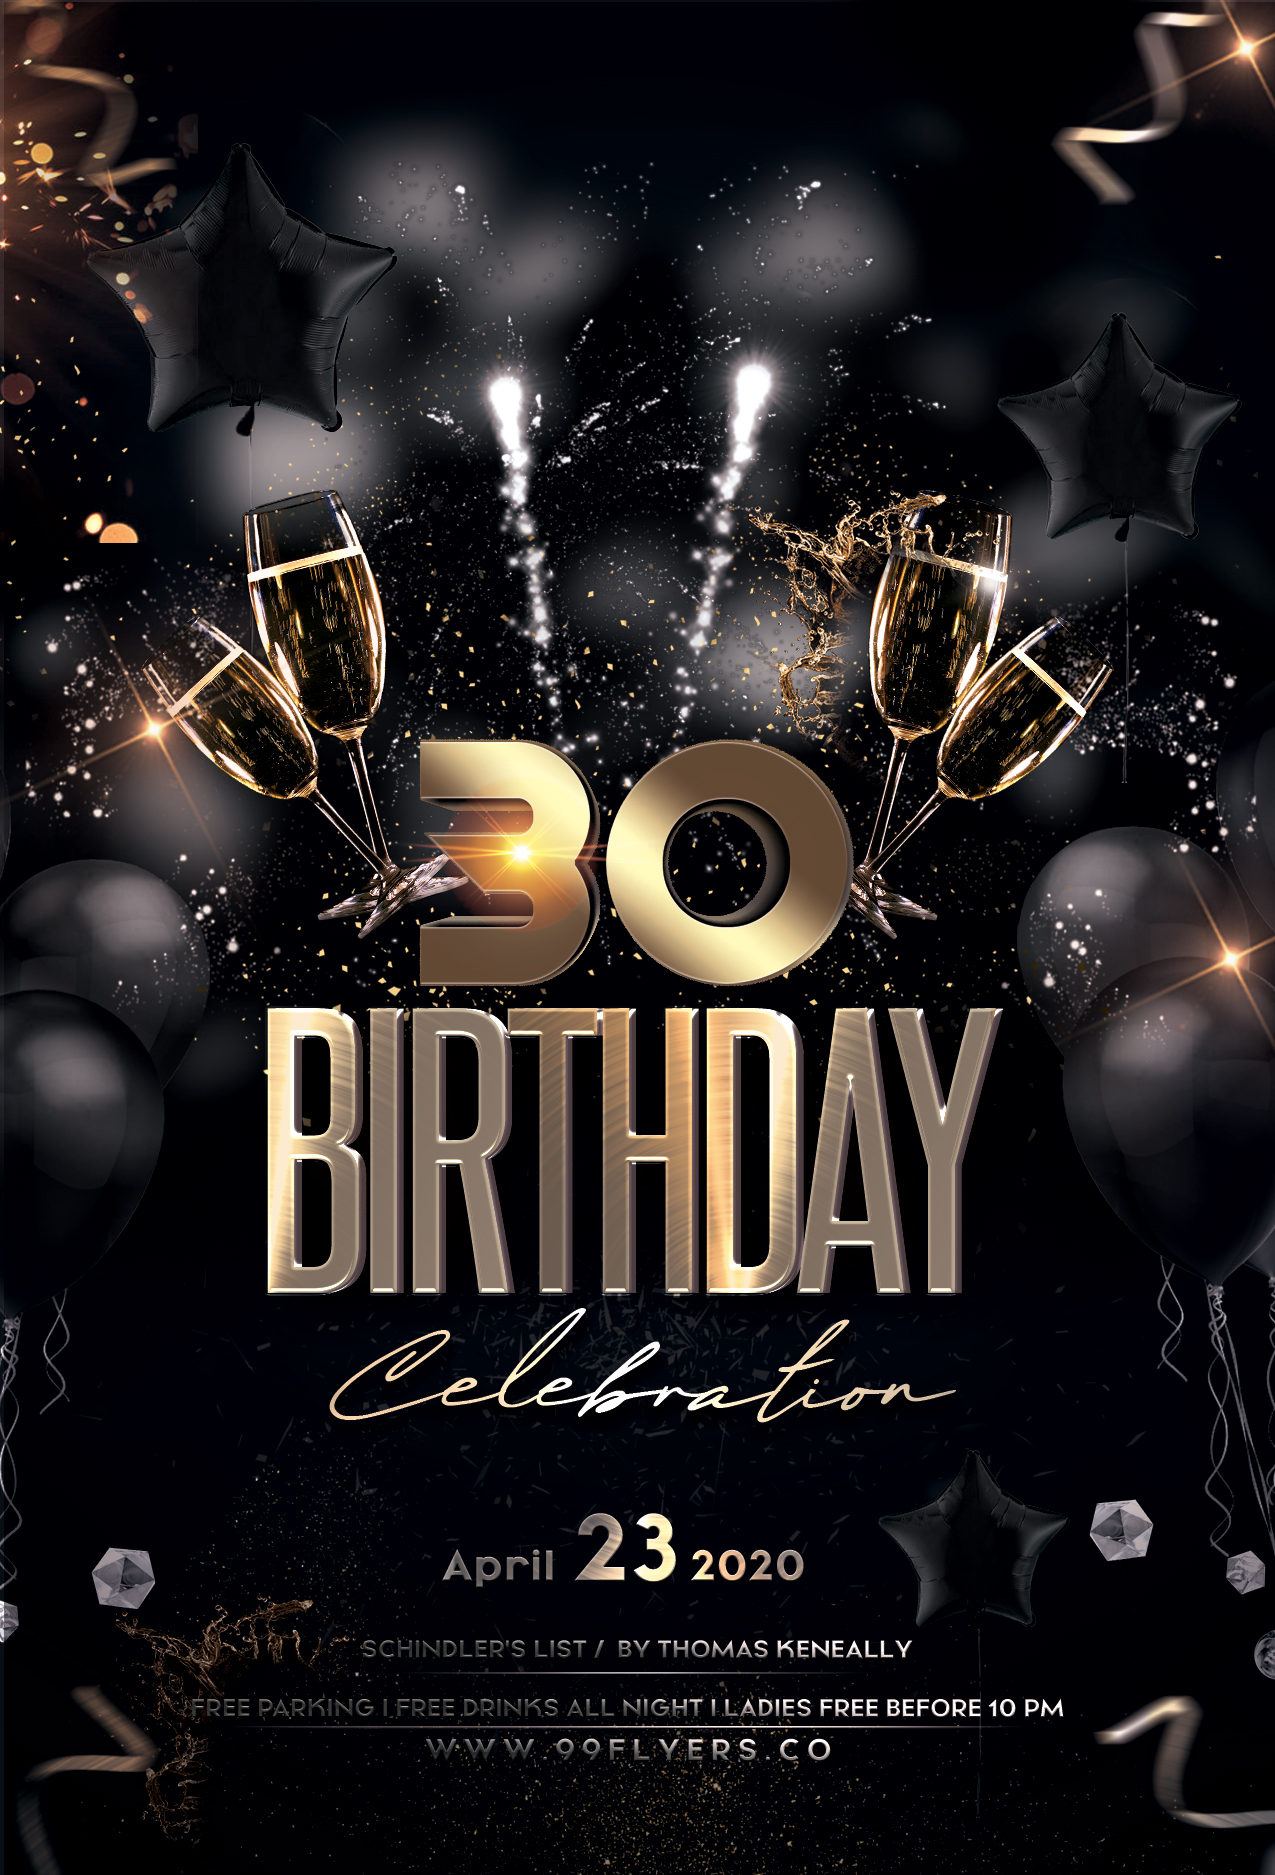 birthday-party-free-psd-flyer-template-by-99flyers-on-deviantart